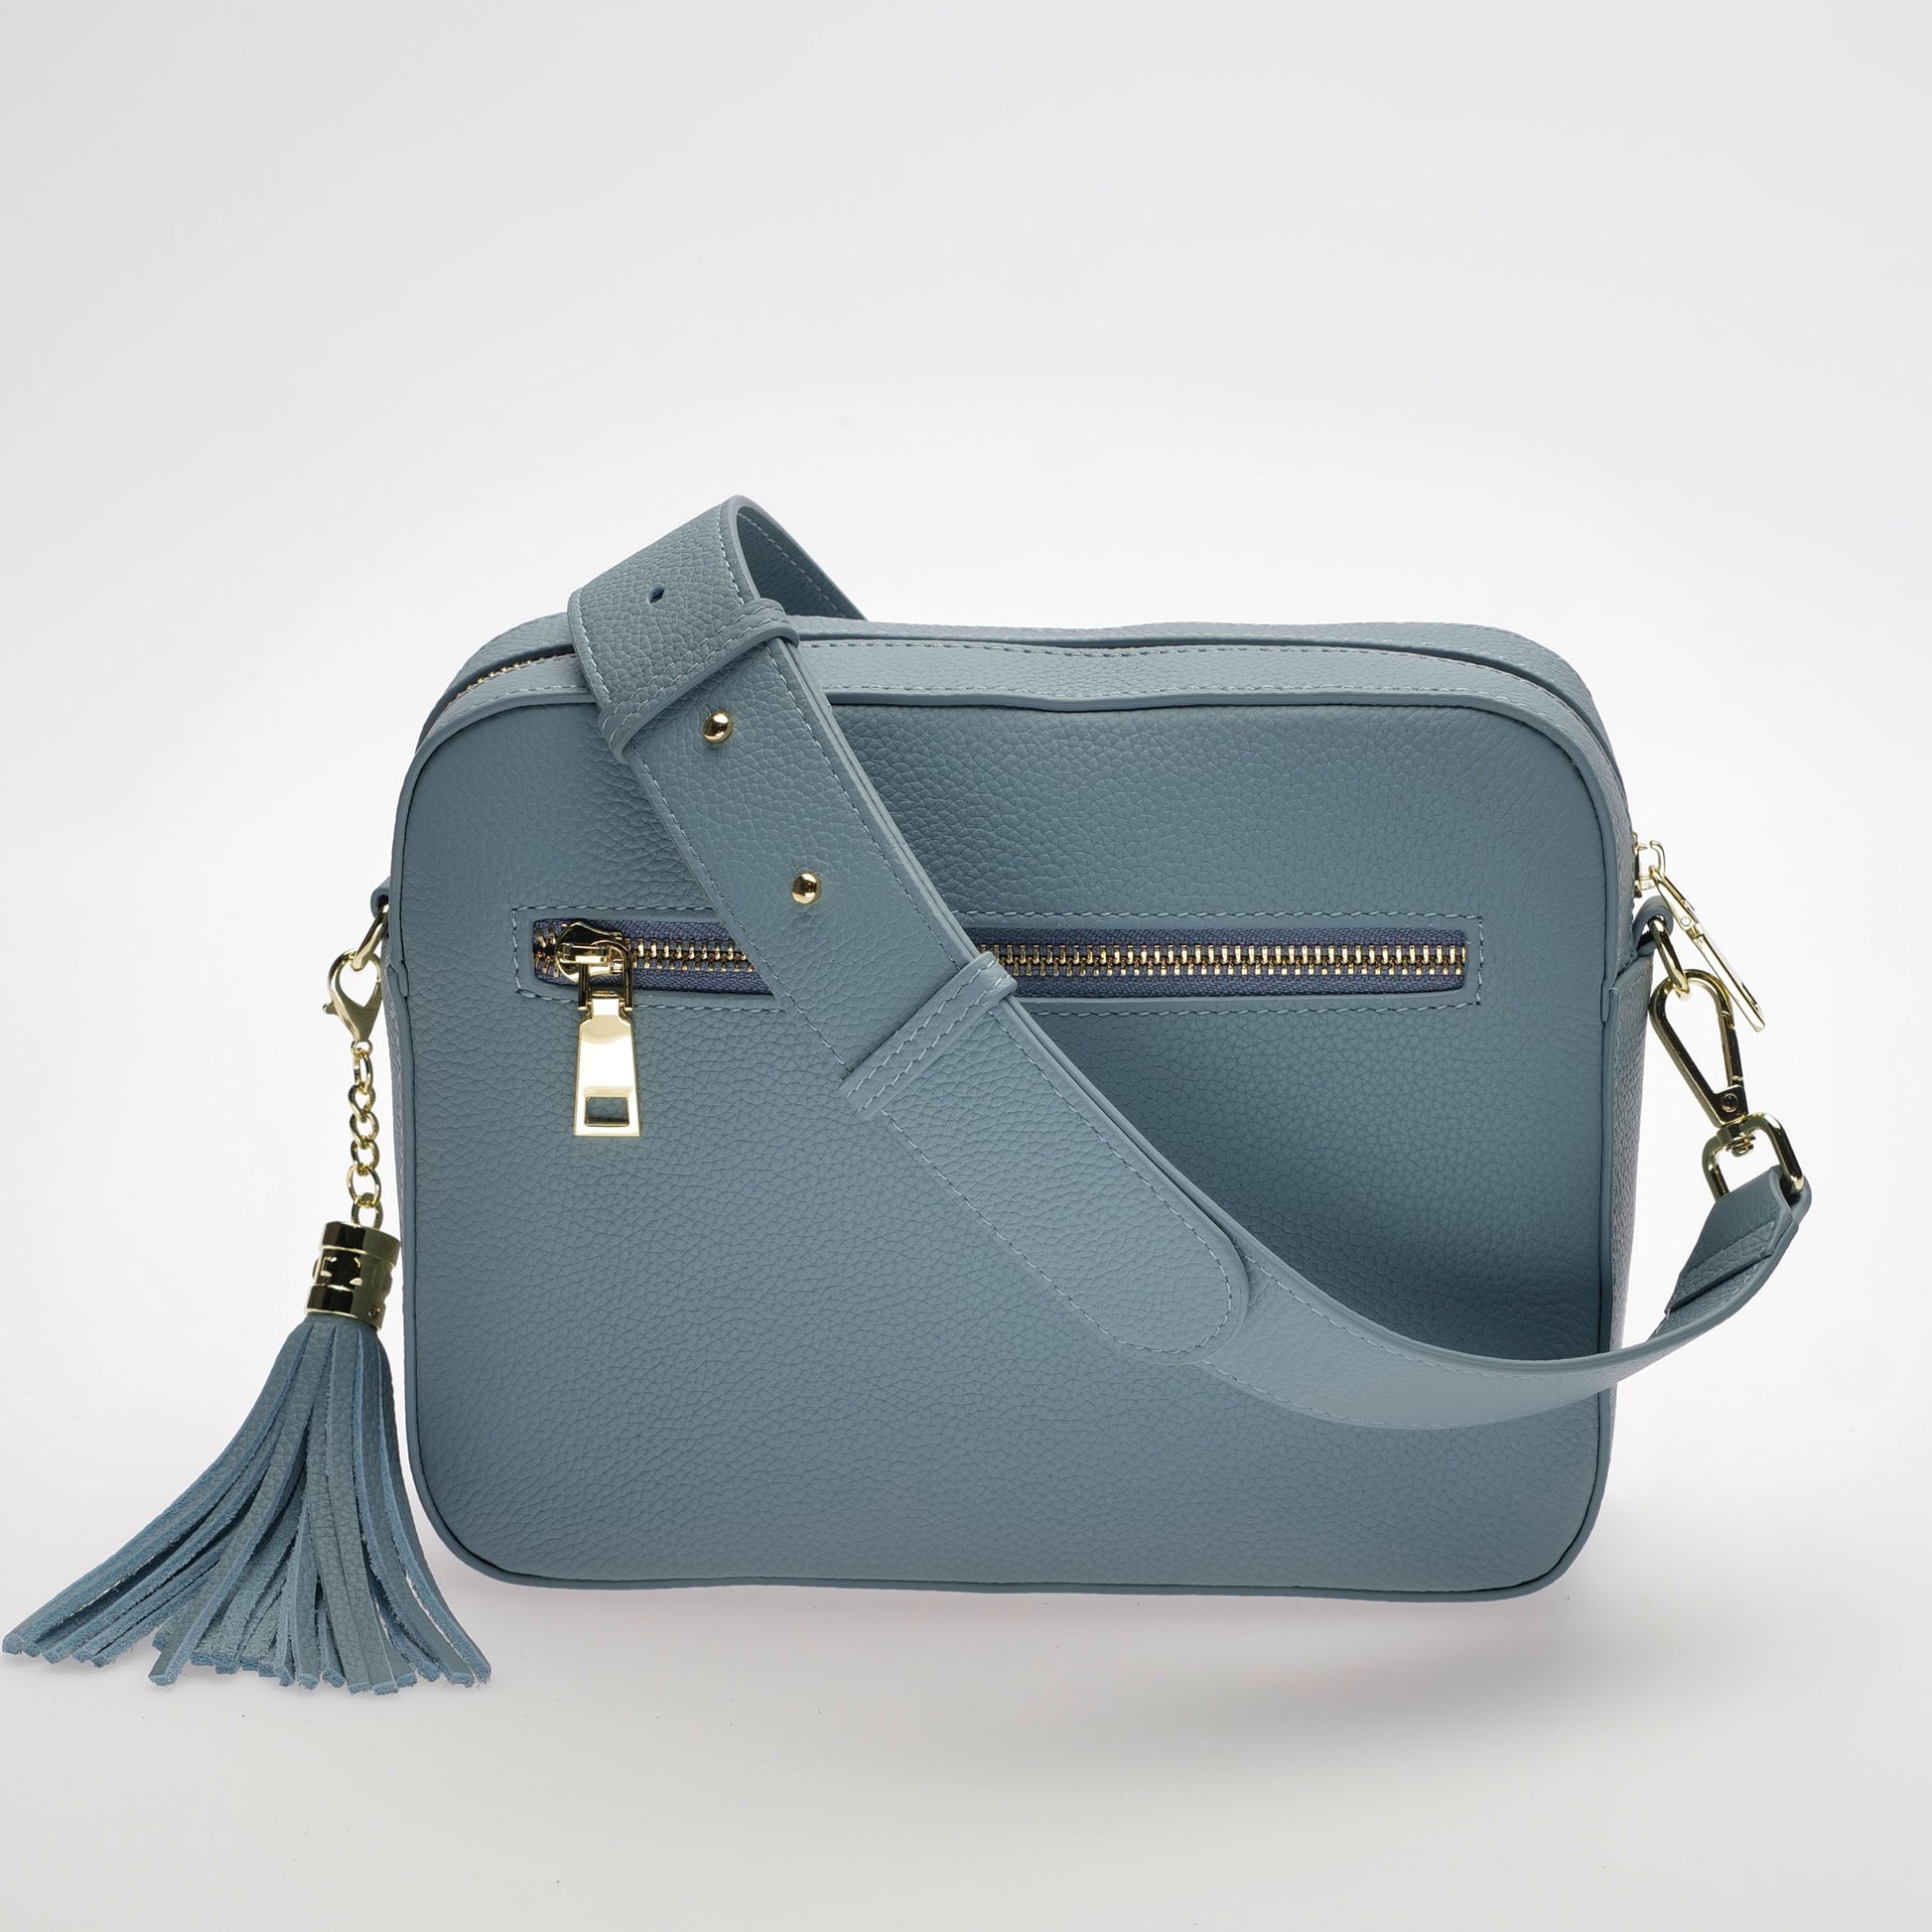 Stratford Leather Crossbody Bag in West Coast Blue by Swoon London